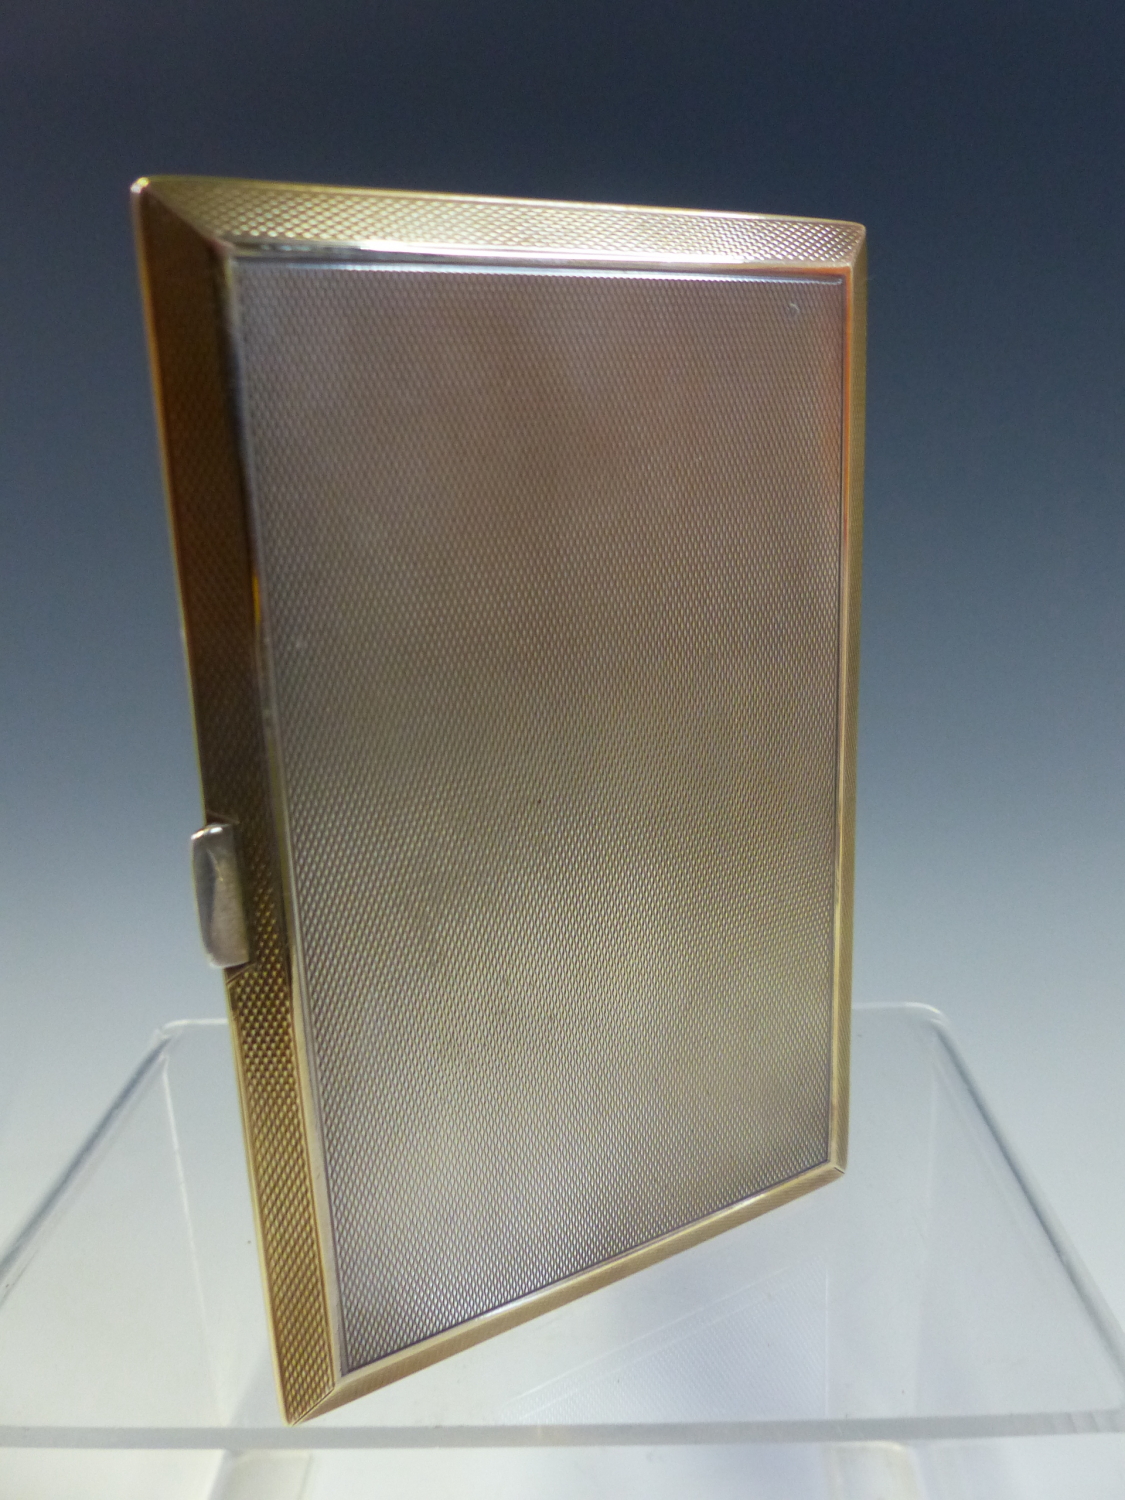 1934 AMERICAS CUP INTEREST, A GIFT SILVER CIGARETTE CASE BY PAGET AND BRAHAM, LONDON 1934, TO GERALD - Image 6 of 7